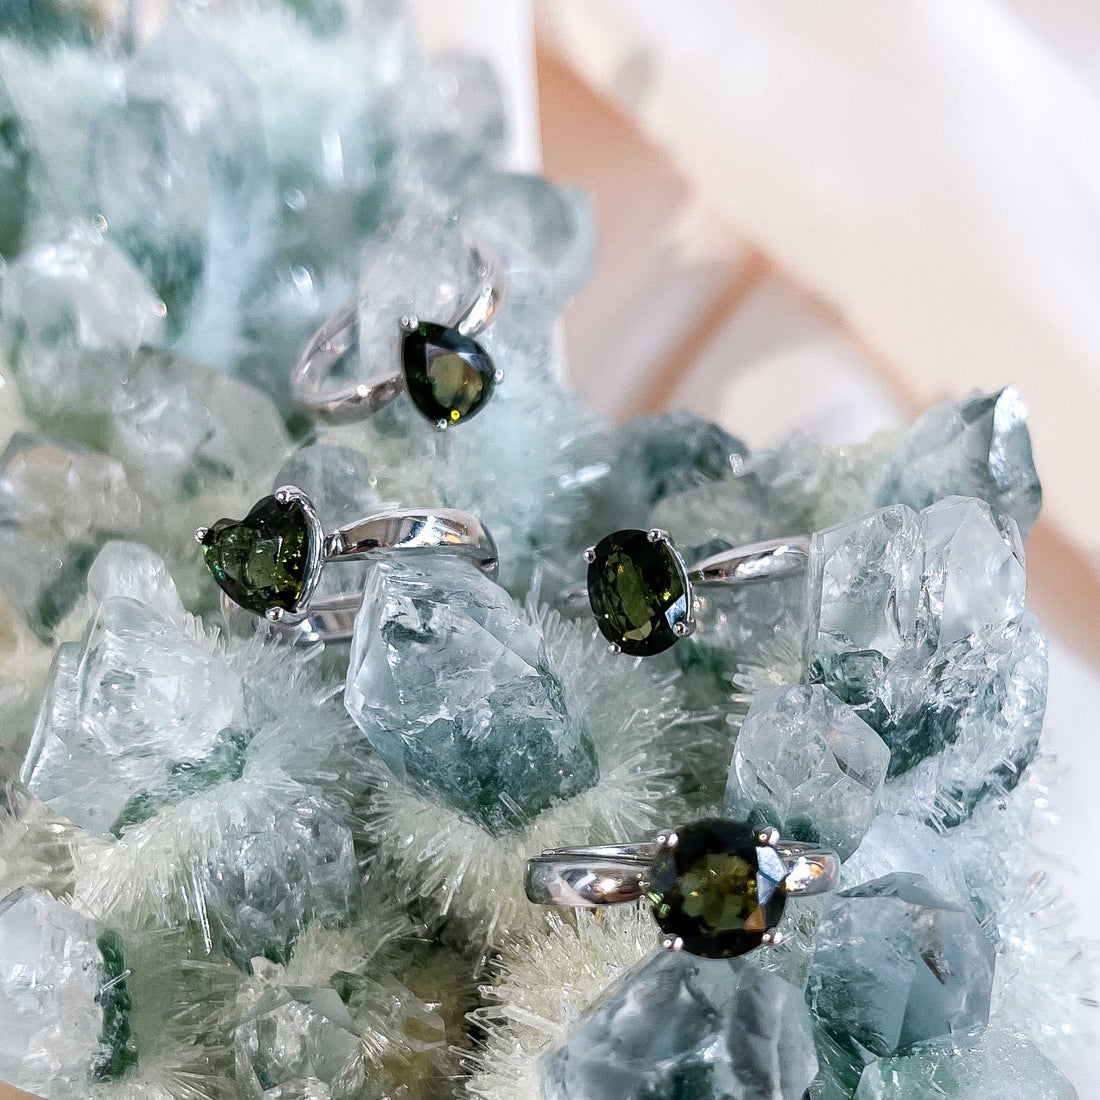 What’s All the Hype About Moldavite? The Story Behind the Crystal That Fell to Earth.